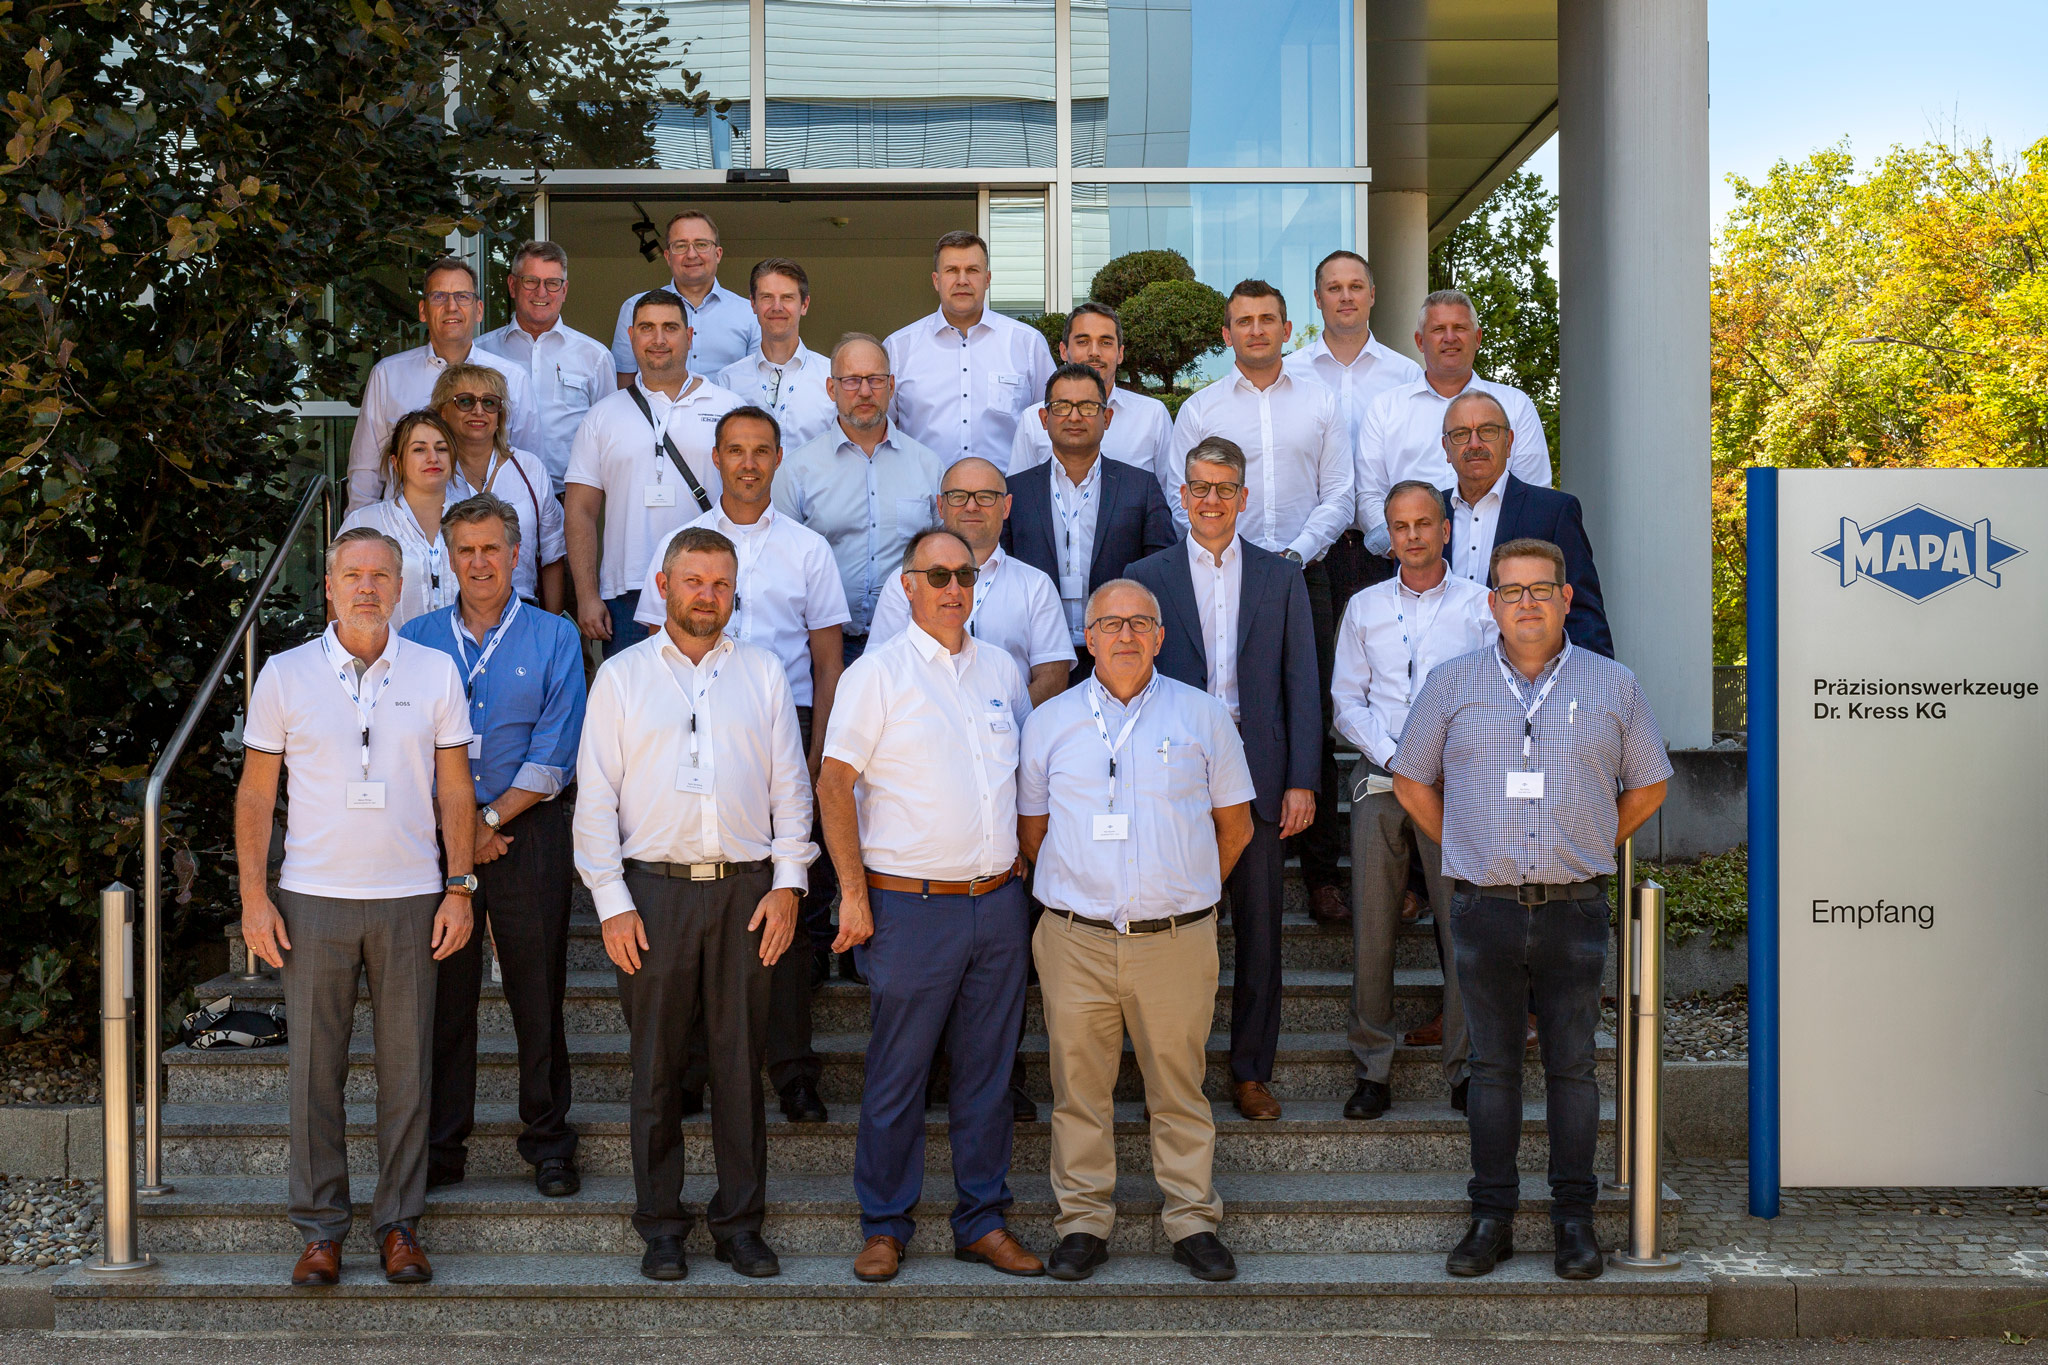 Participants of the International Sales Representative Meeting at the headquarters in Aalen